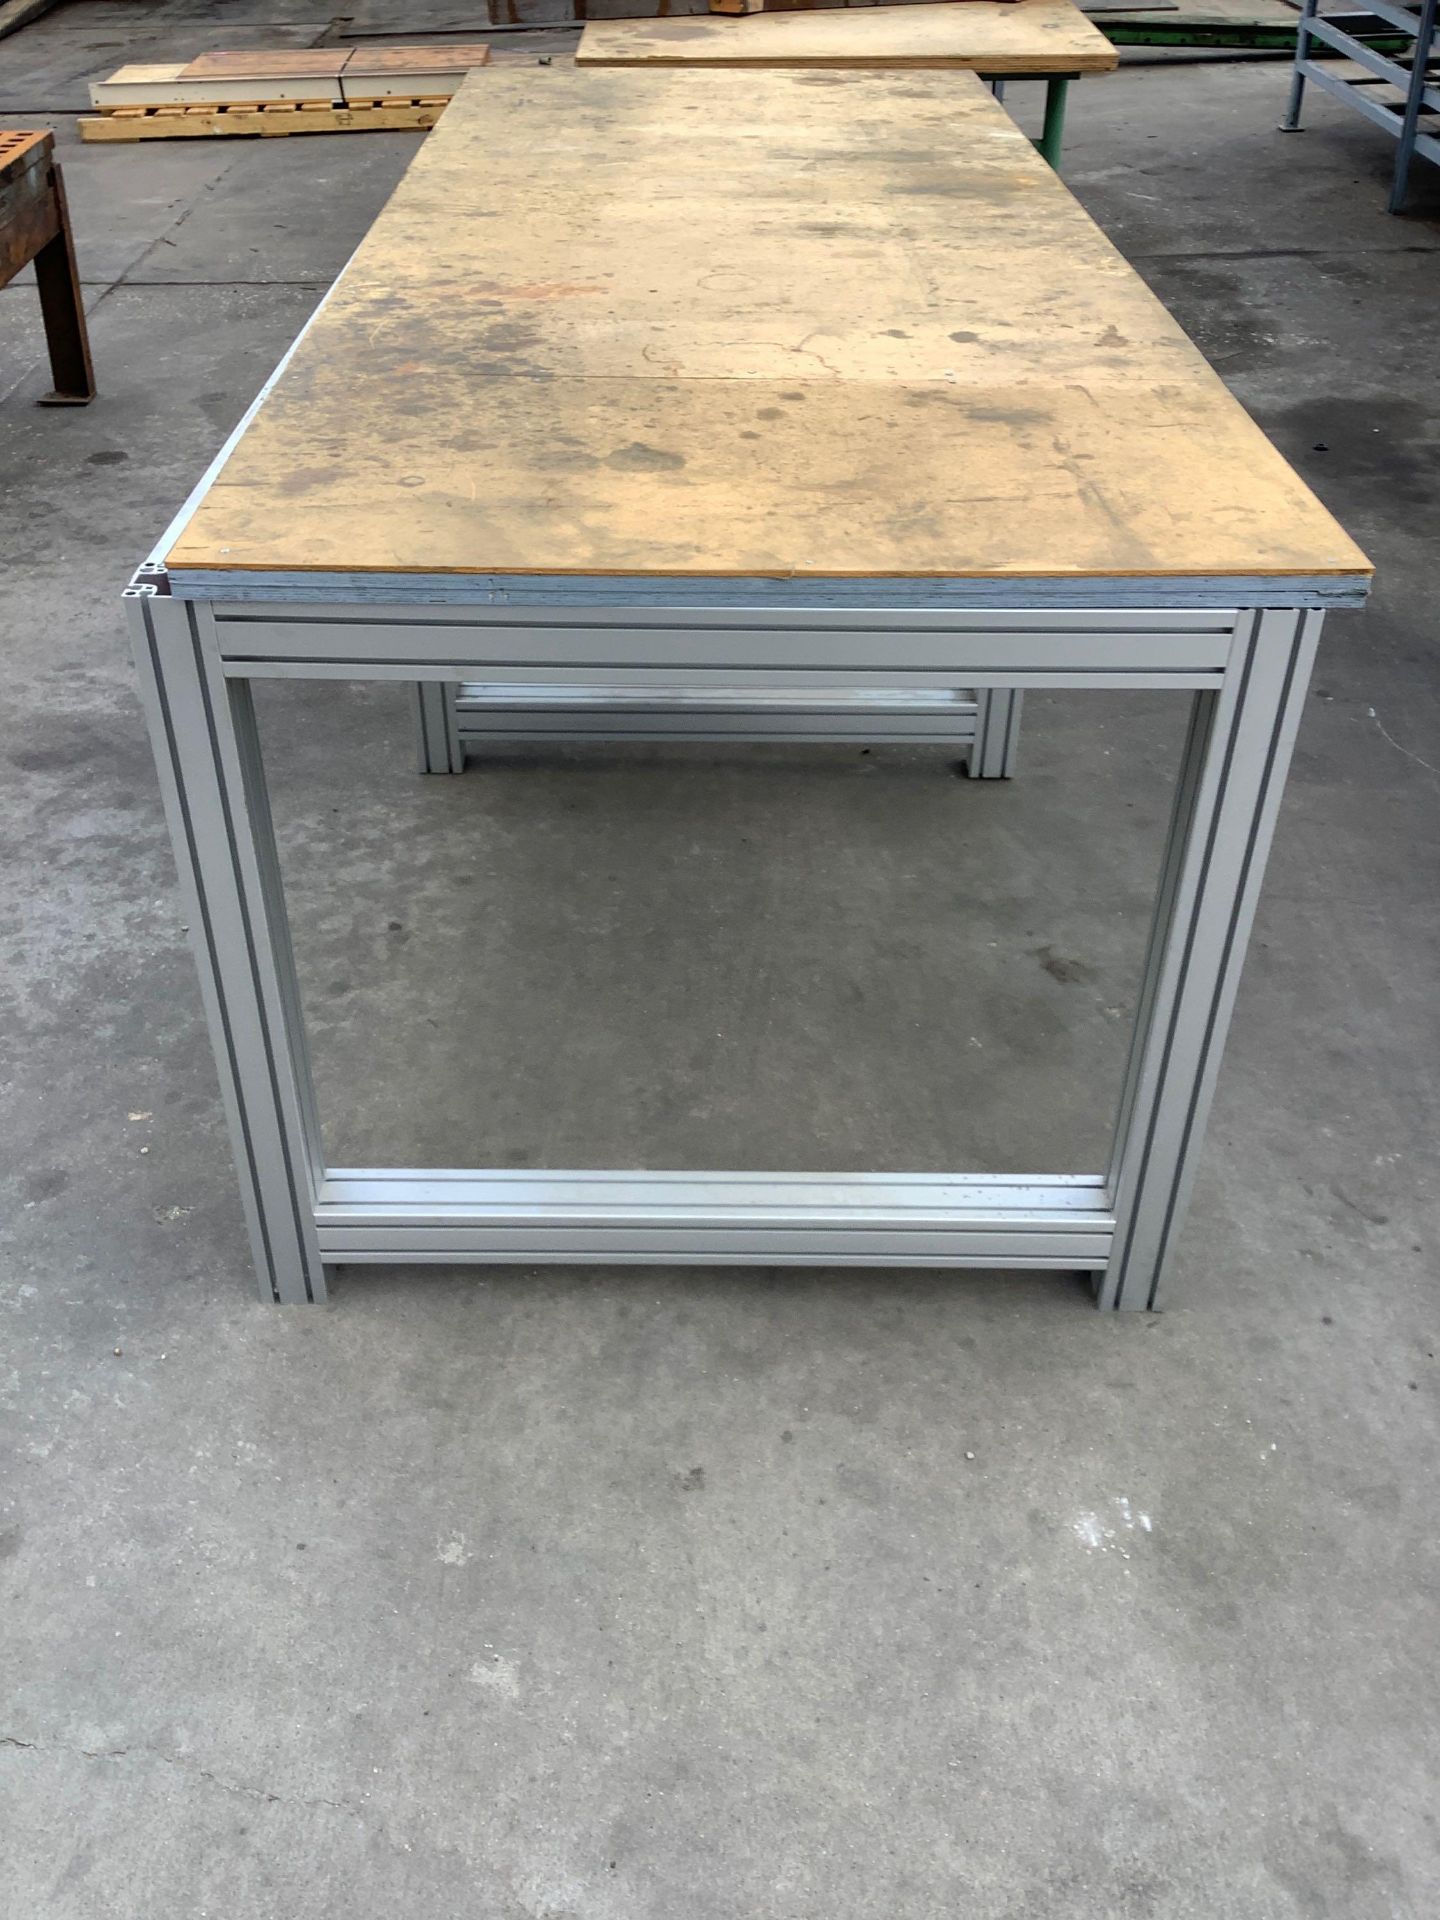 Aluminum Frame Table with Wood Top - Image 2 of 5